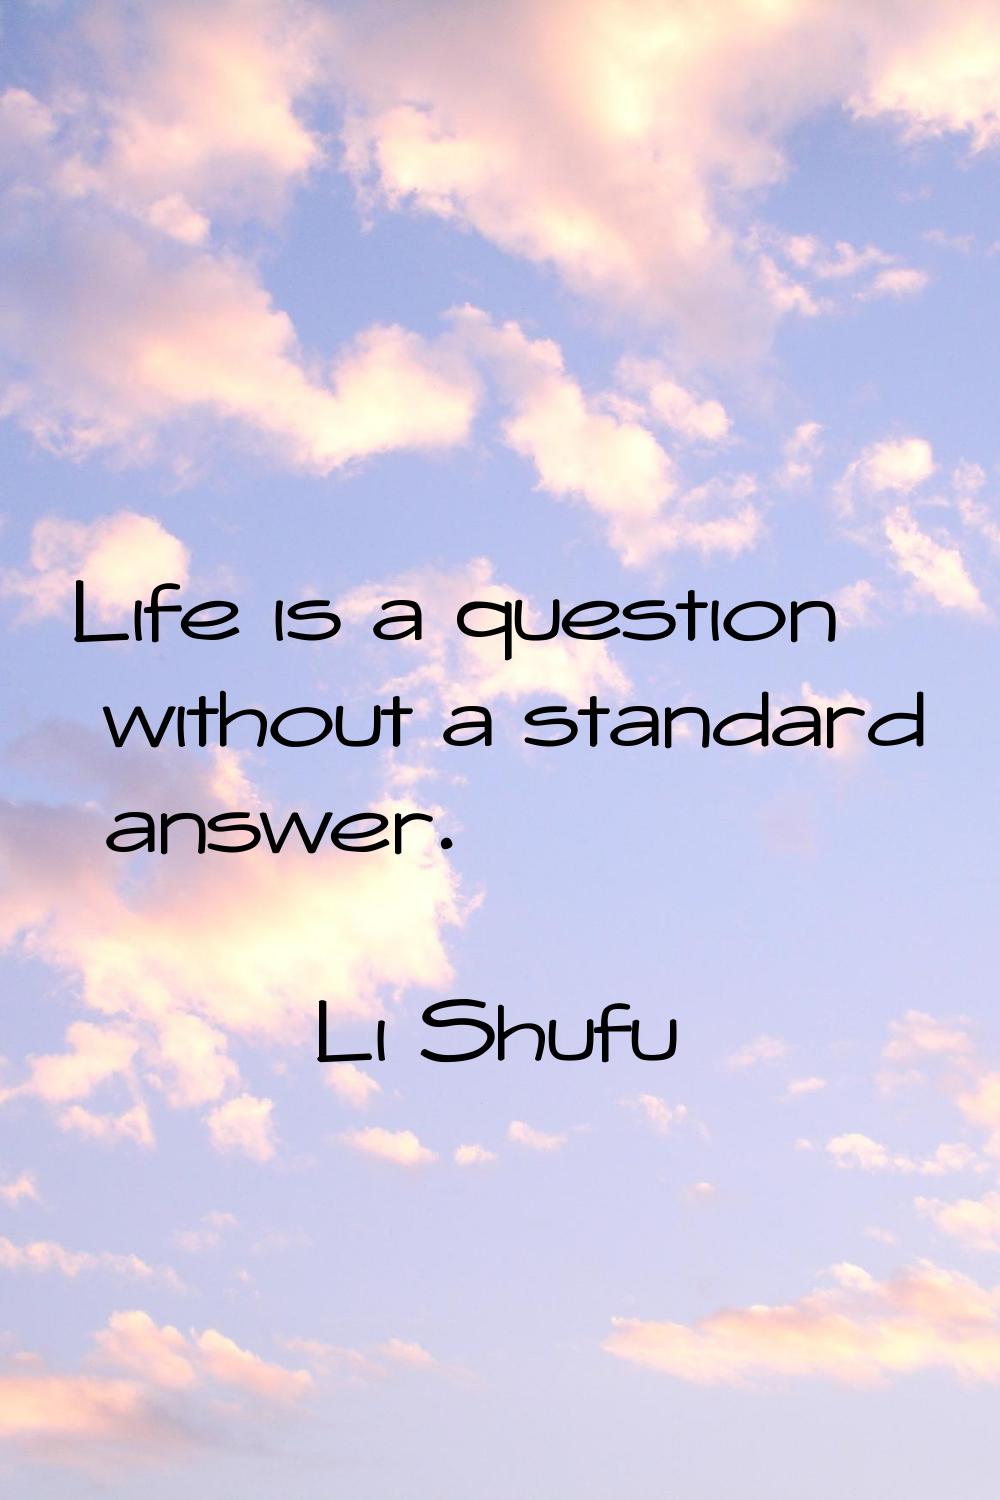 Life is a question without a standard answer.